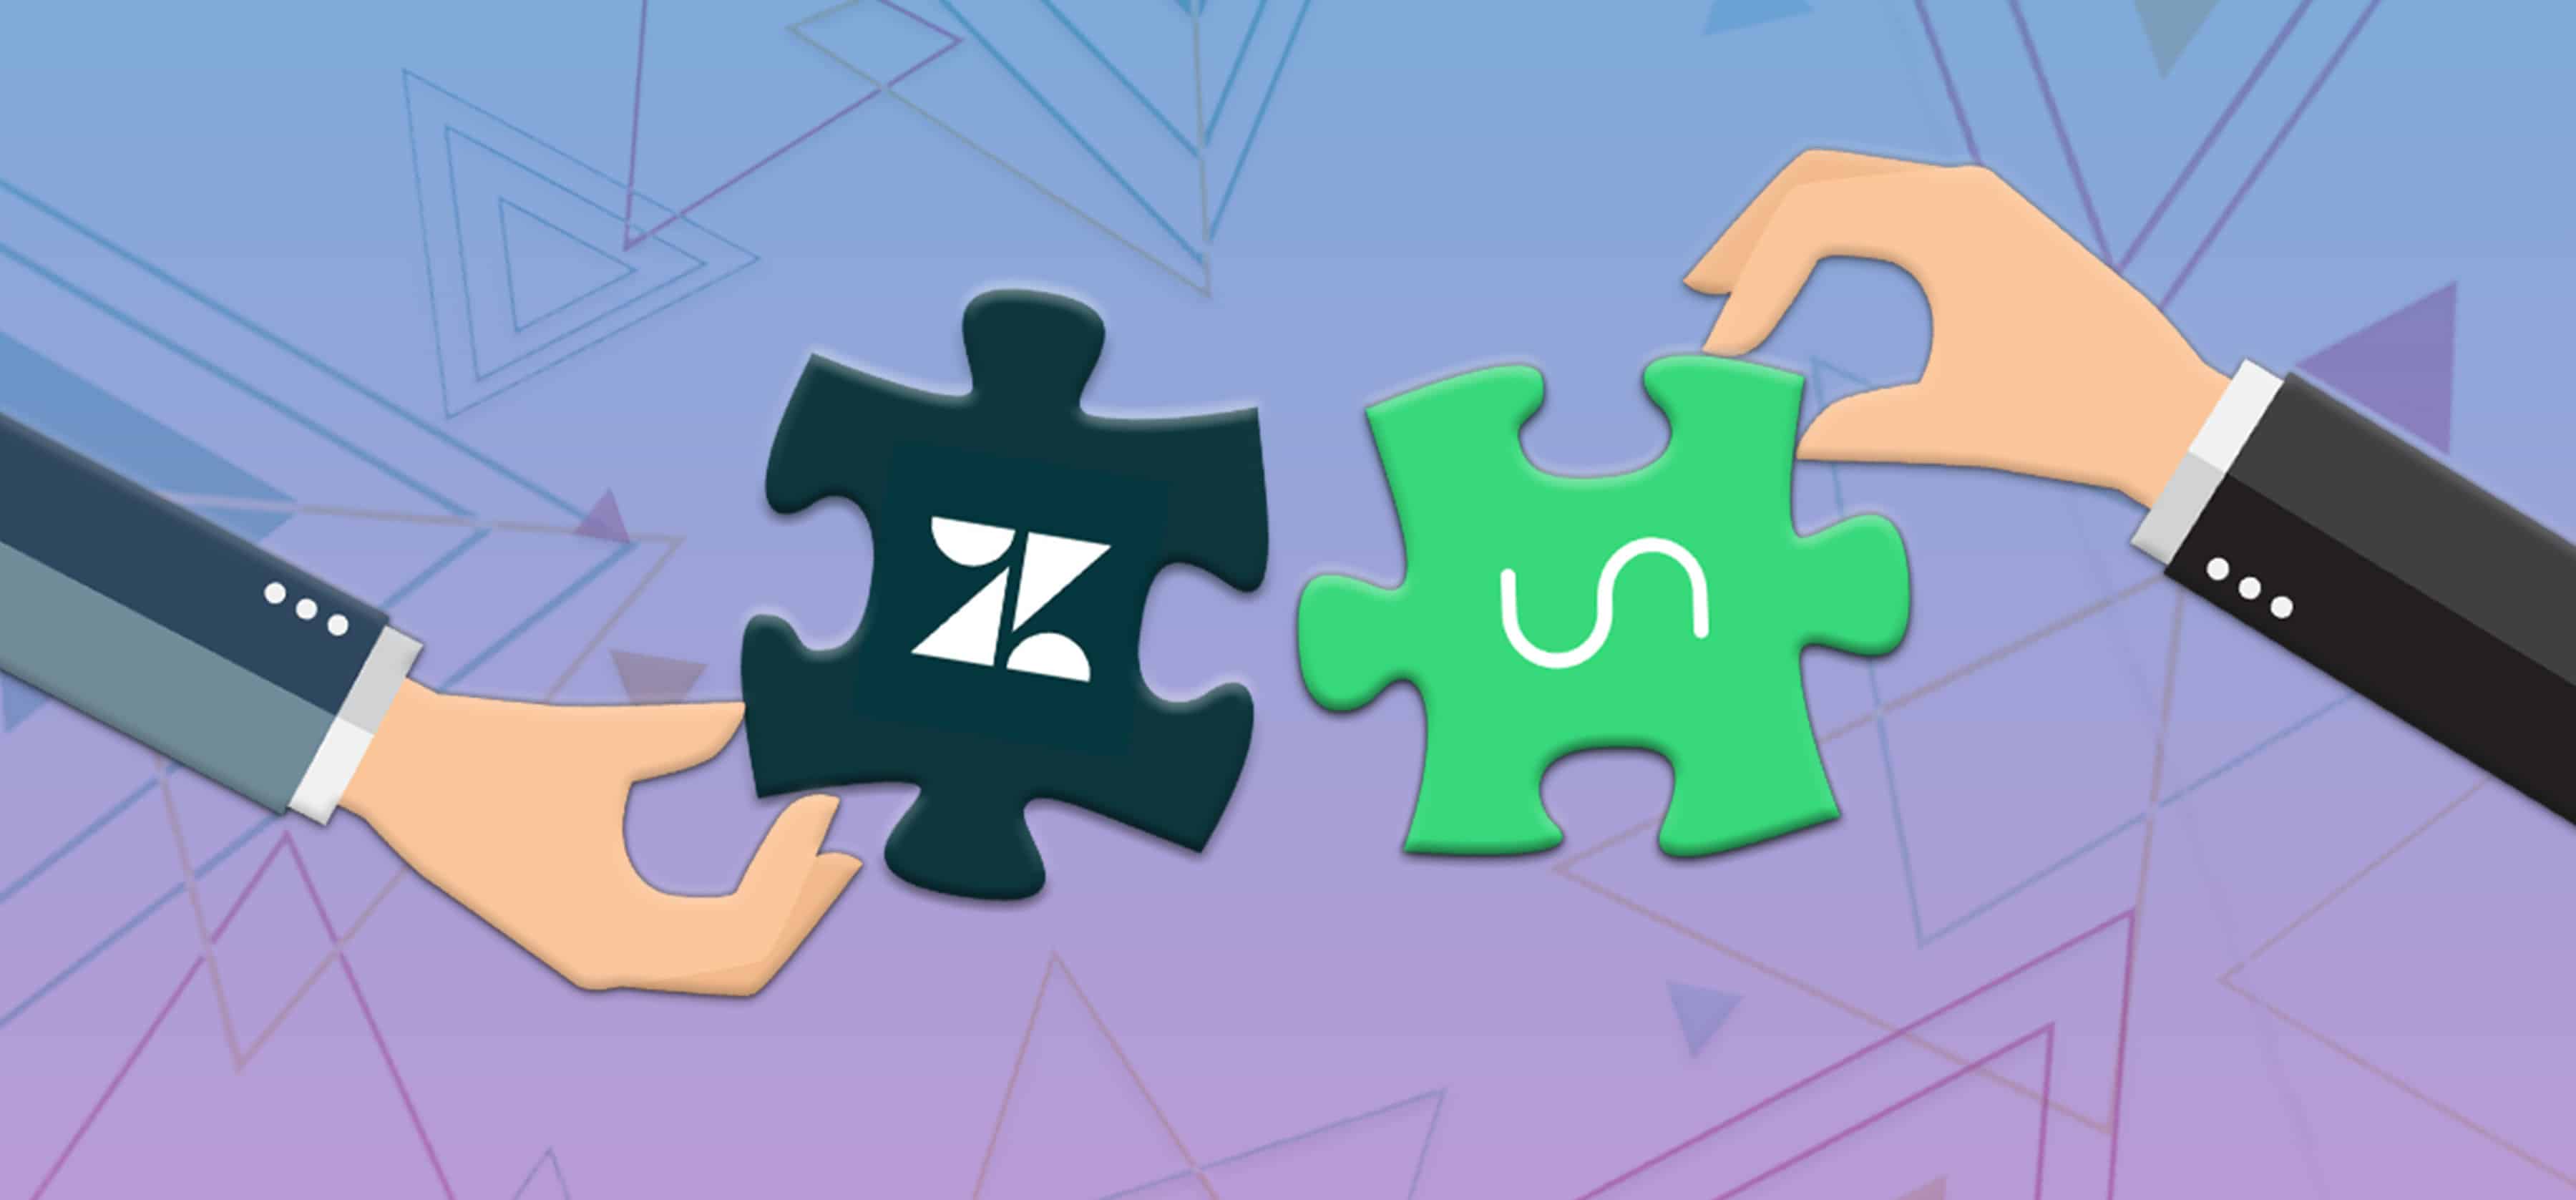 Sync Zendesk to Trello, Asana, and other project management tools with Unito